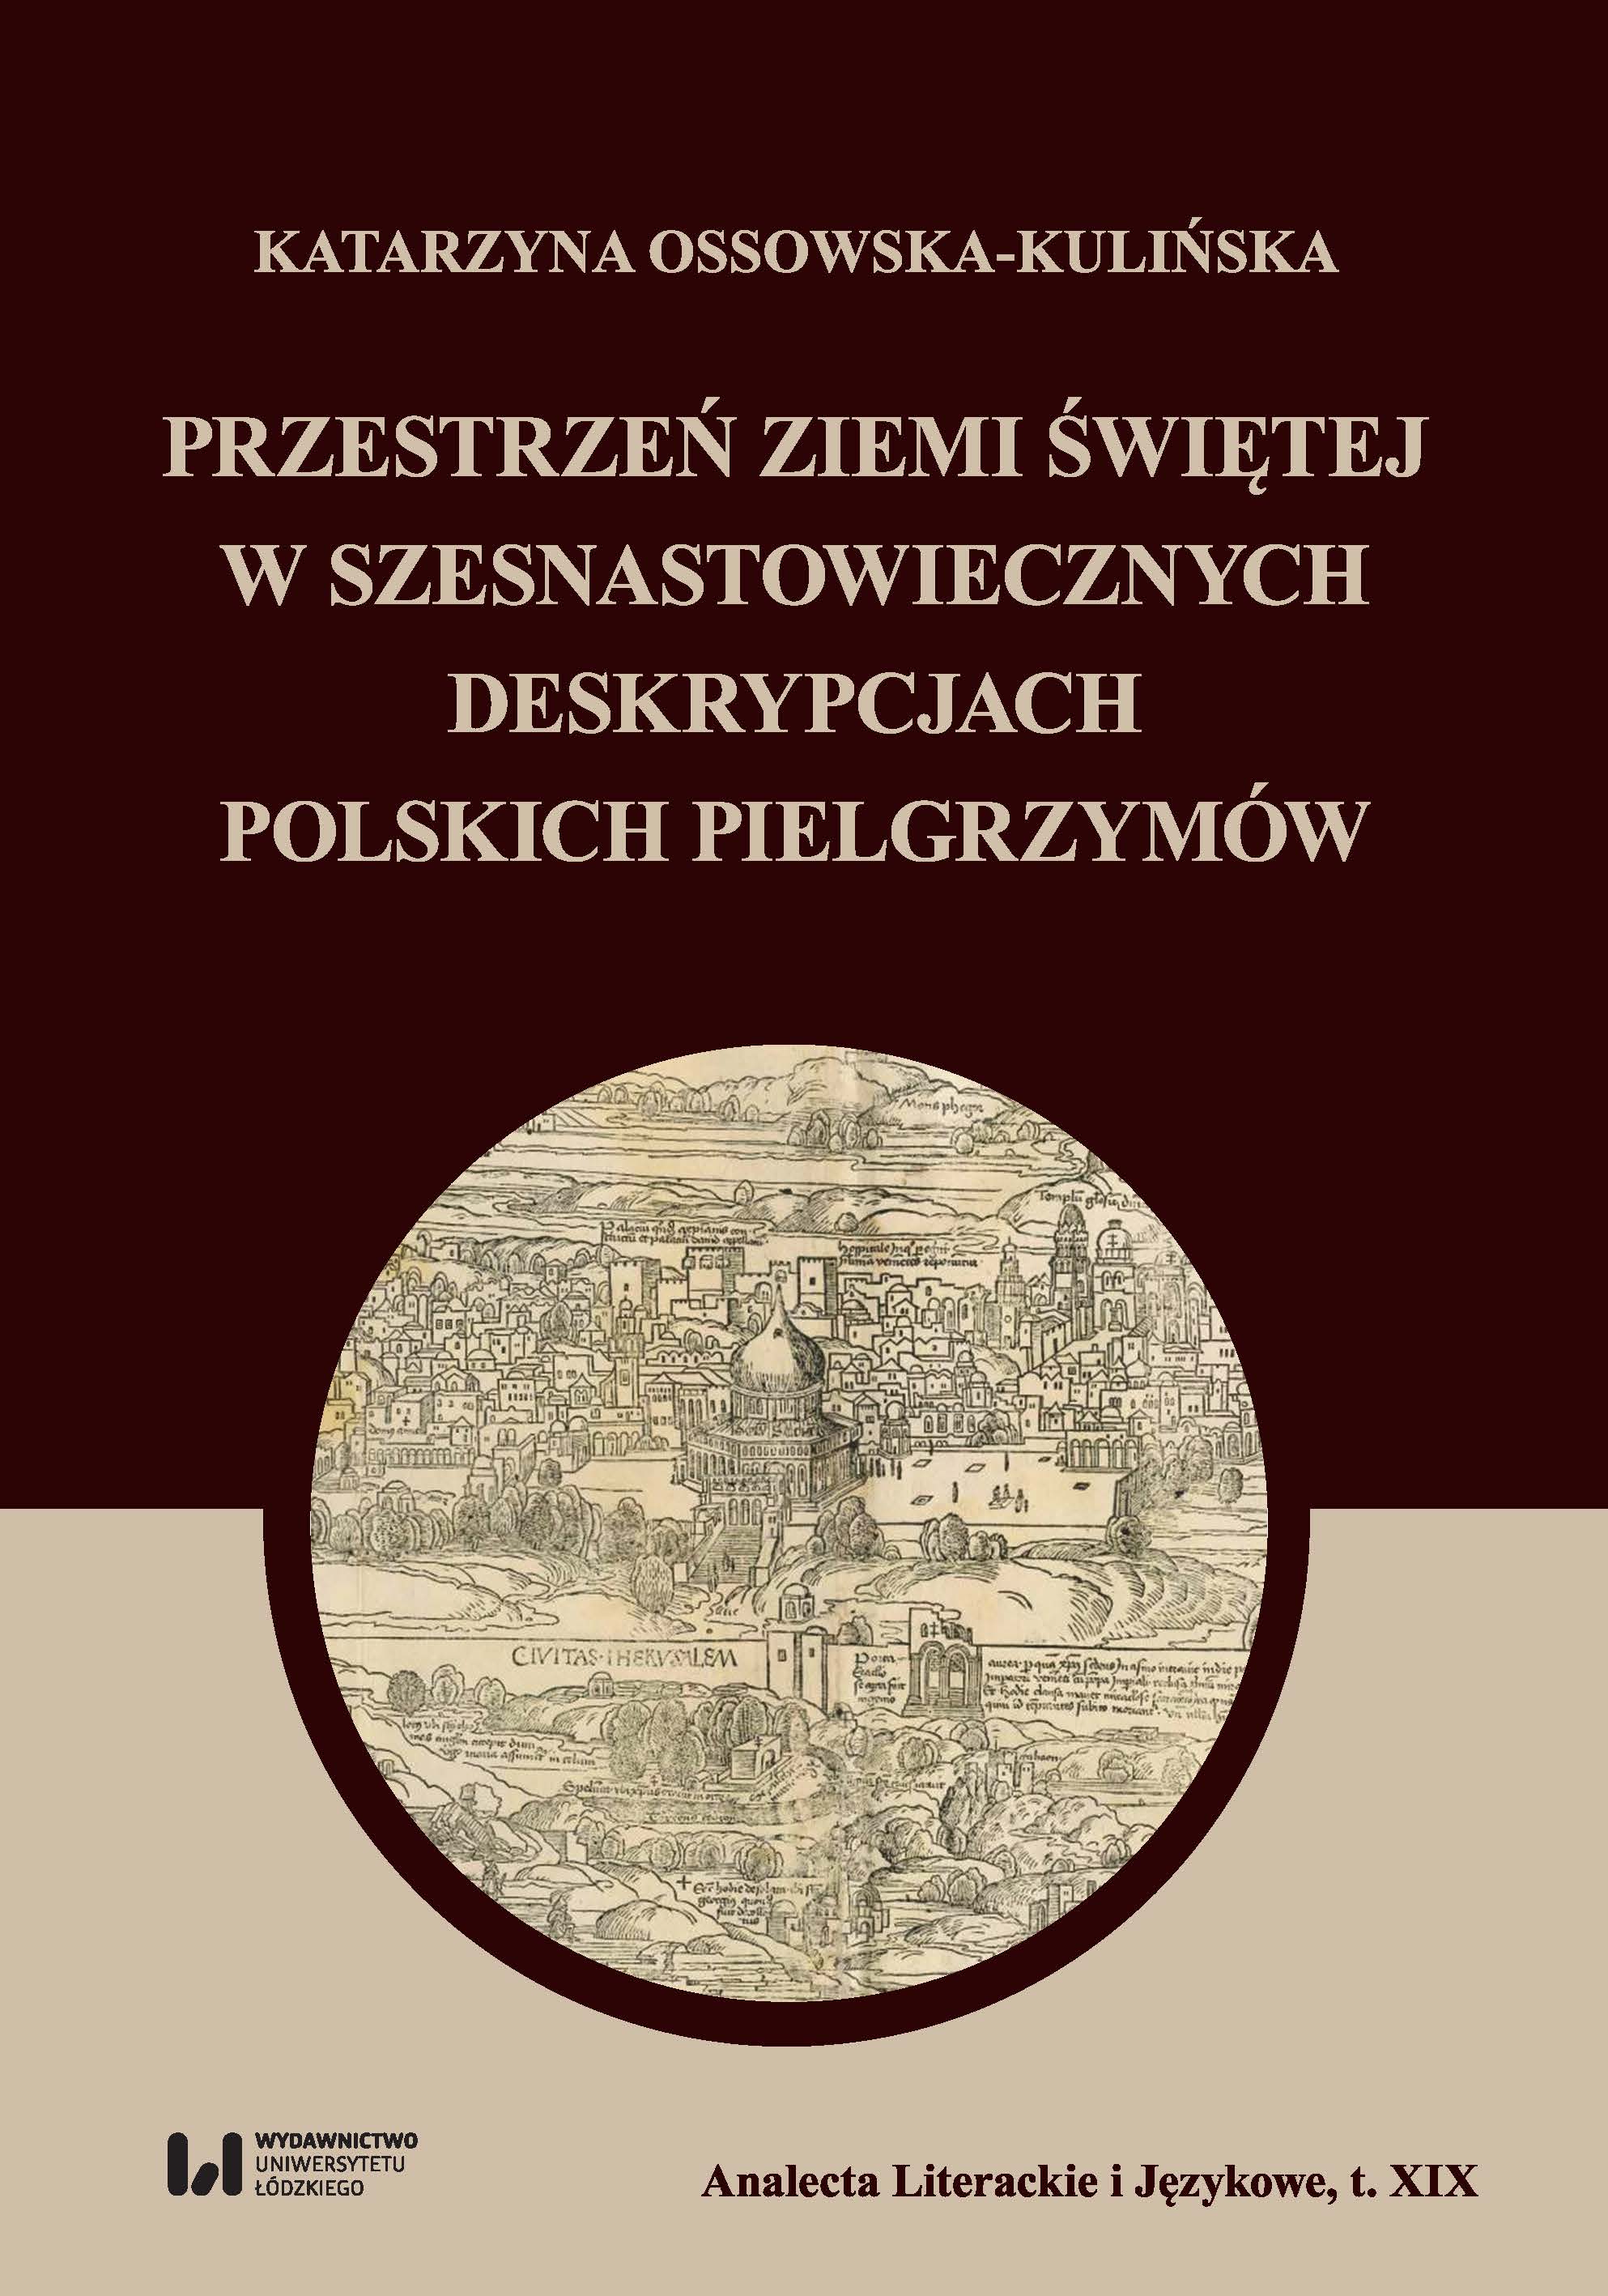 The space of the Holy Land in the 16th-century descriptions of Polish pilgrims. 
Series: Analecta Literackie i Językowe XIX Cover Image